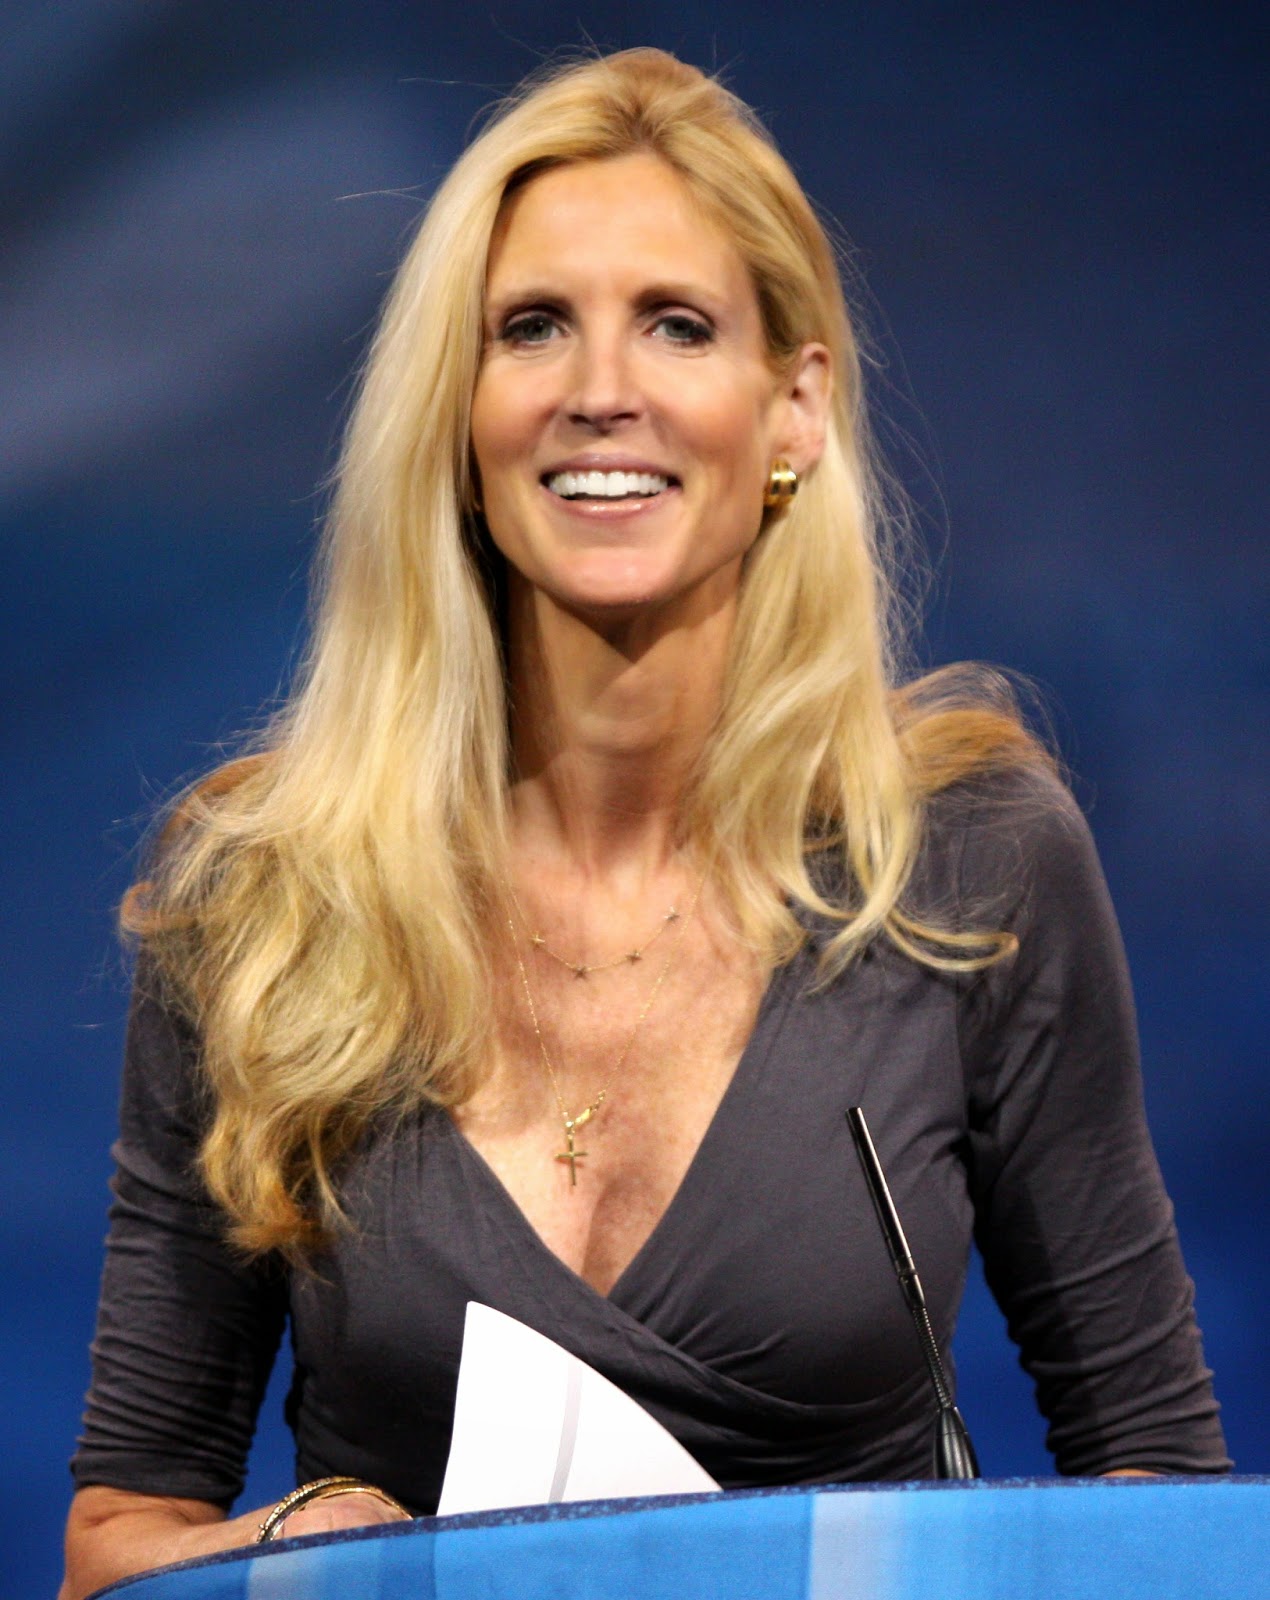 Ann Coulter: "I would like evolution to join the roster of other discredited religions, like the Cargo Cult of the South Pacific."